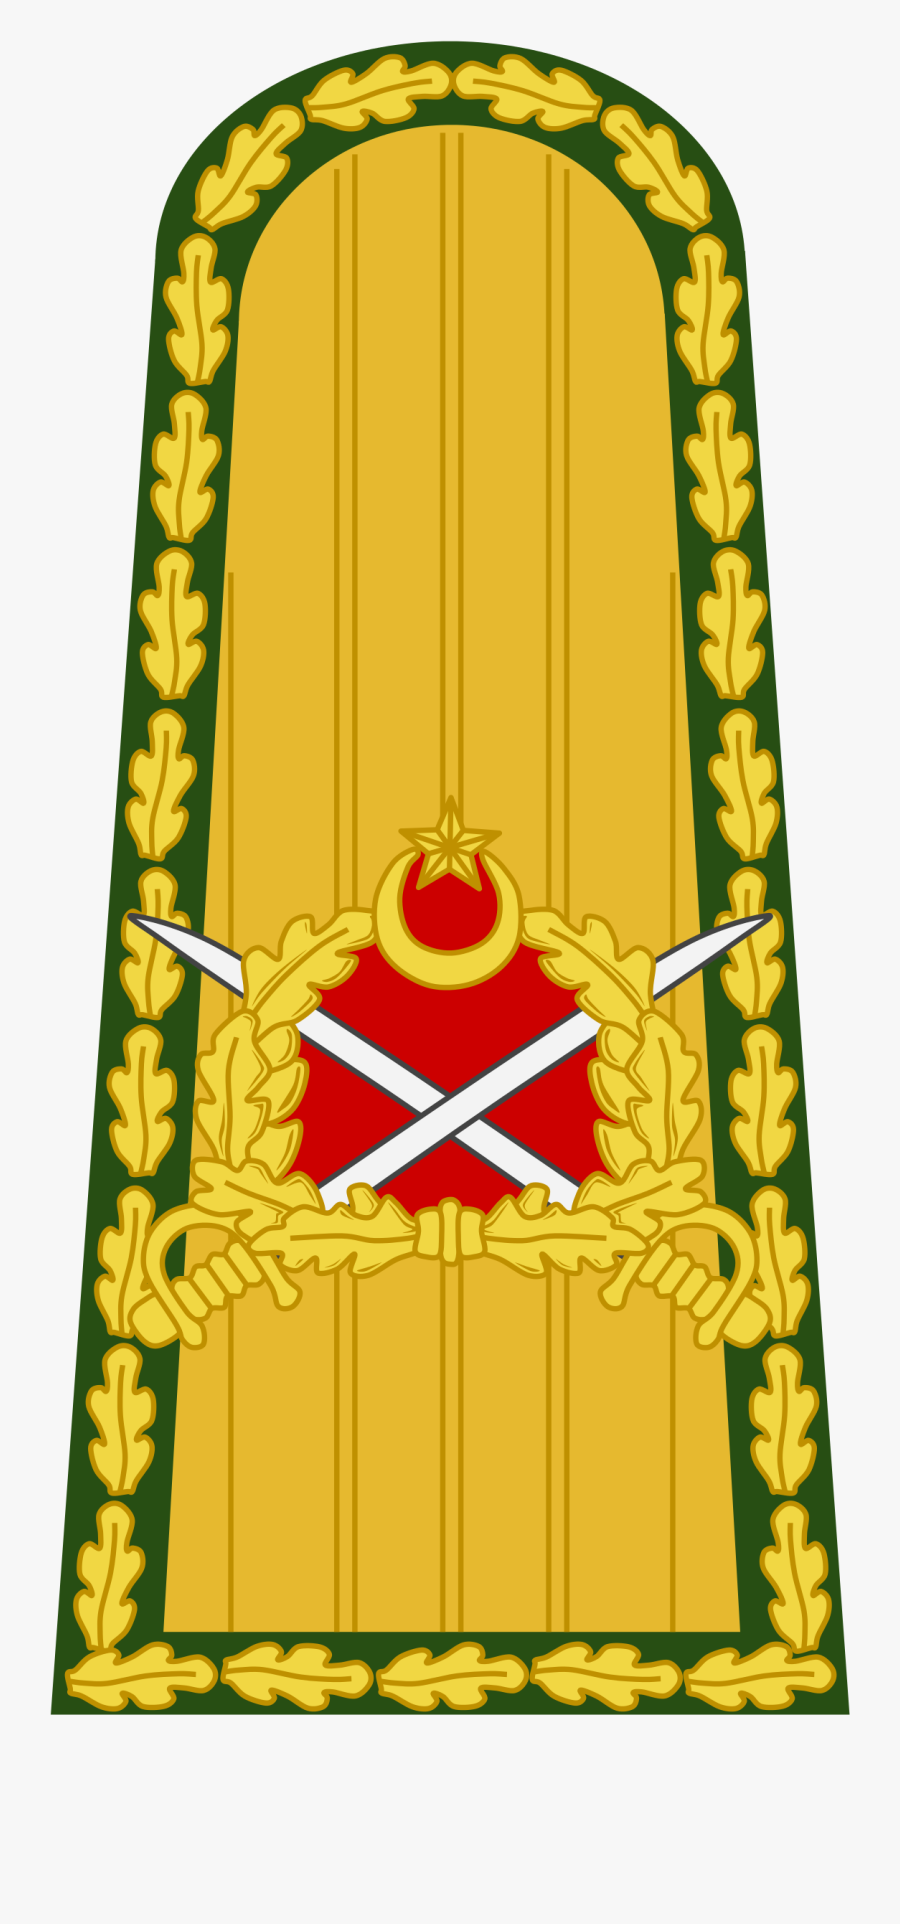 Chief Of General Staff Insignia, Transparent Clipart